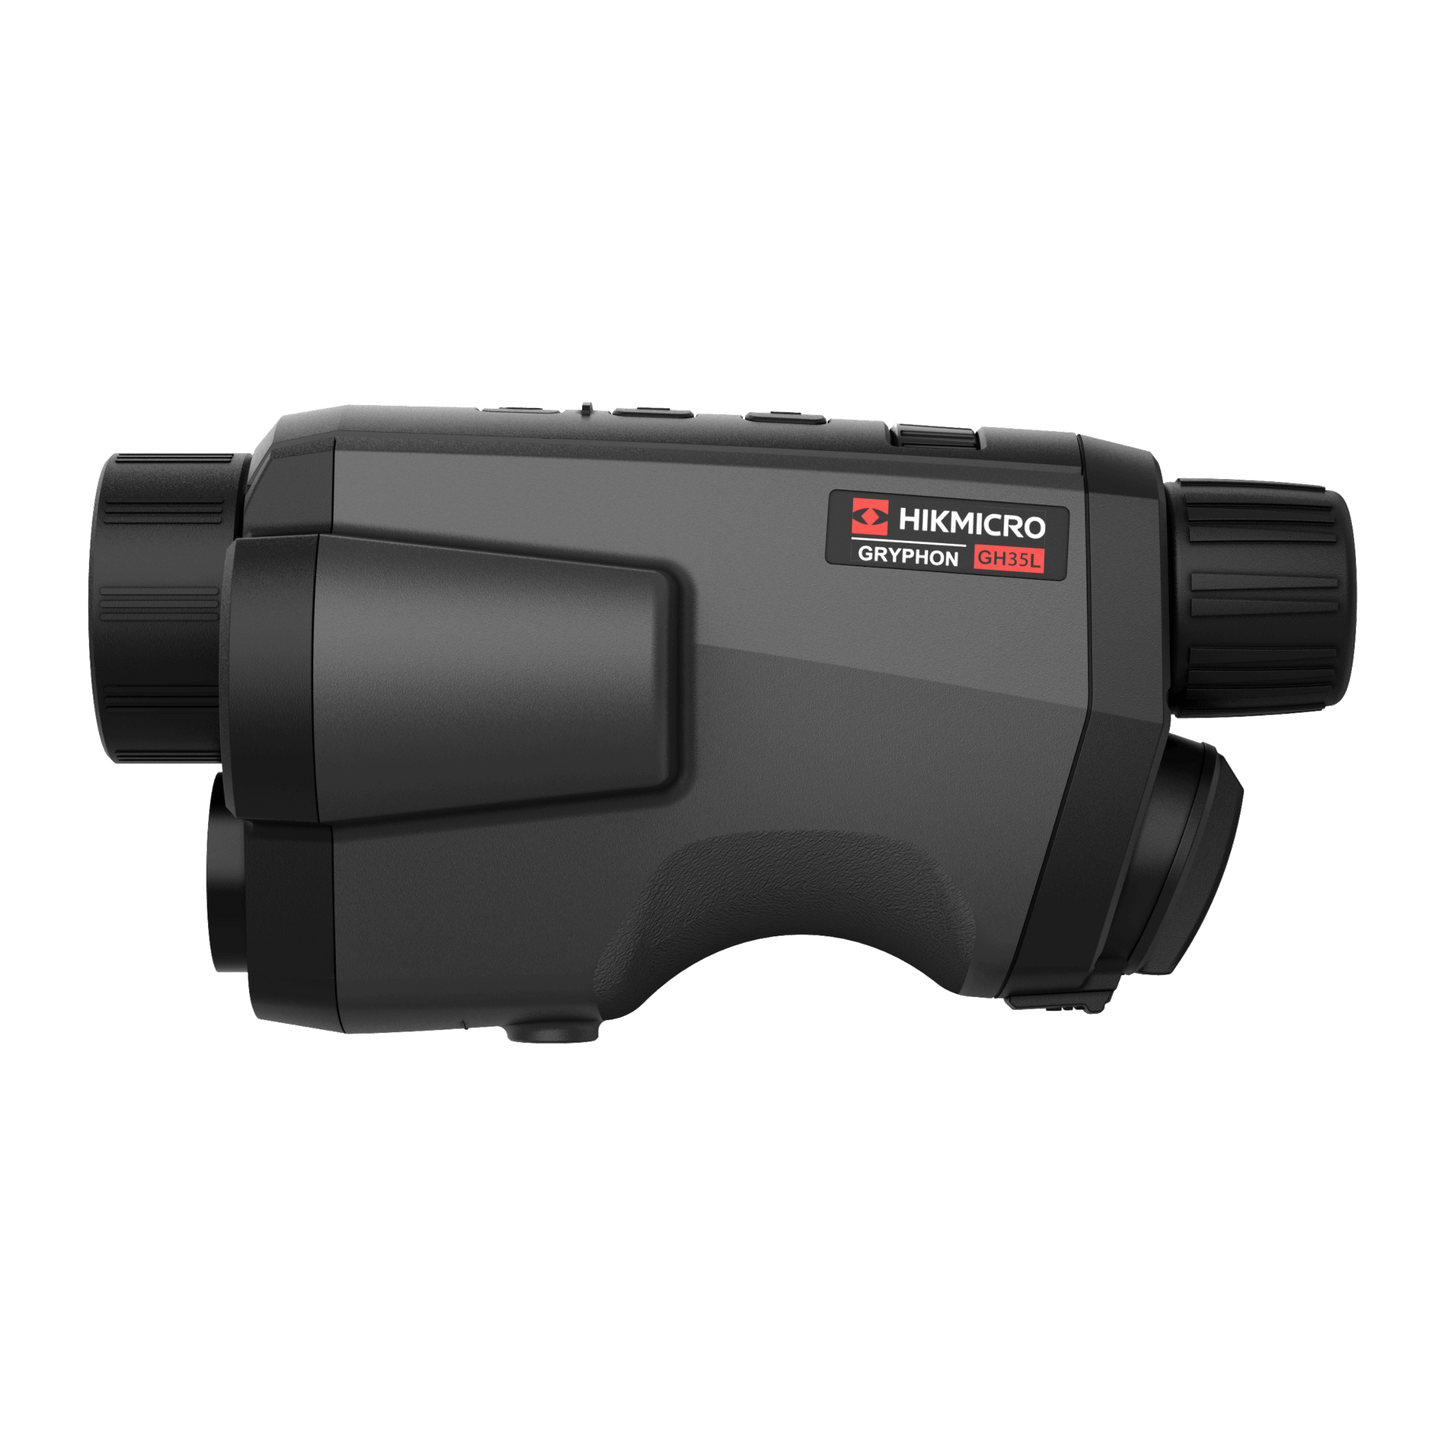 Cape Thermal imaging monocular for sale - HikMicro Gryphon GH35L Handheld thermal monocular left side view